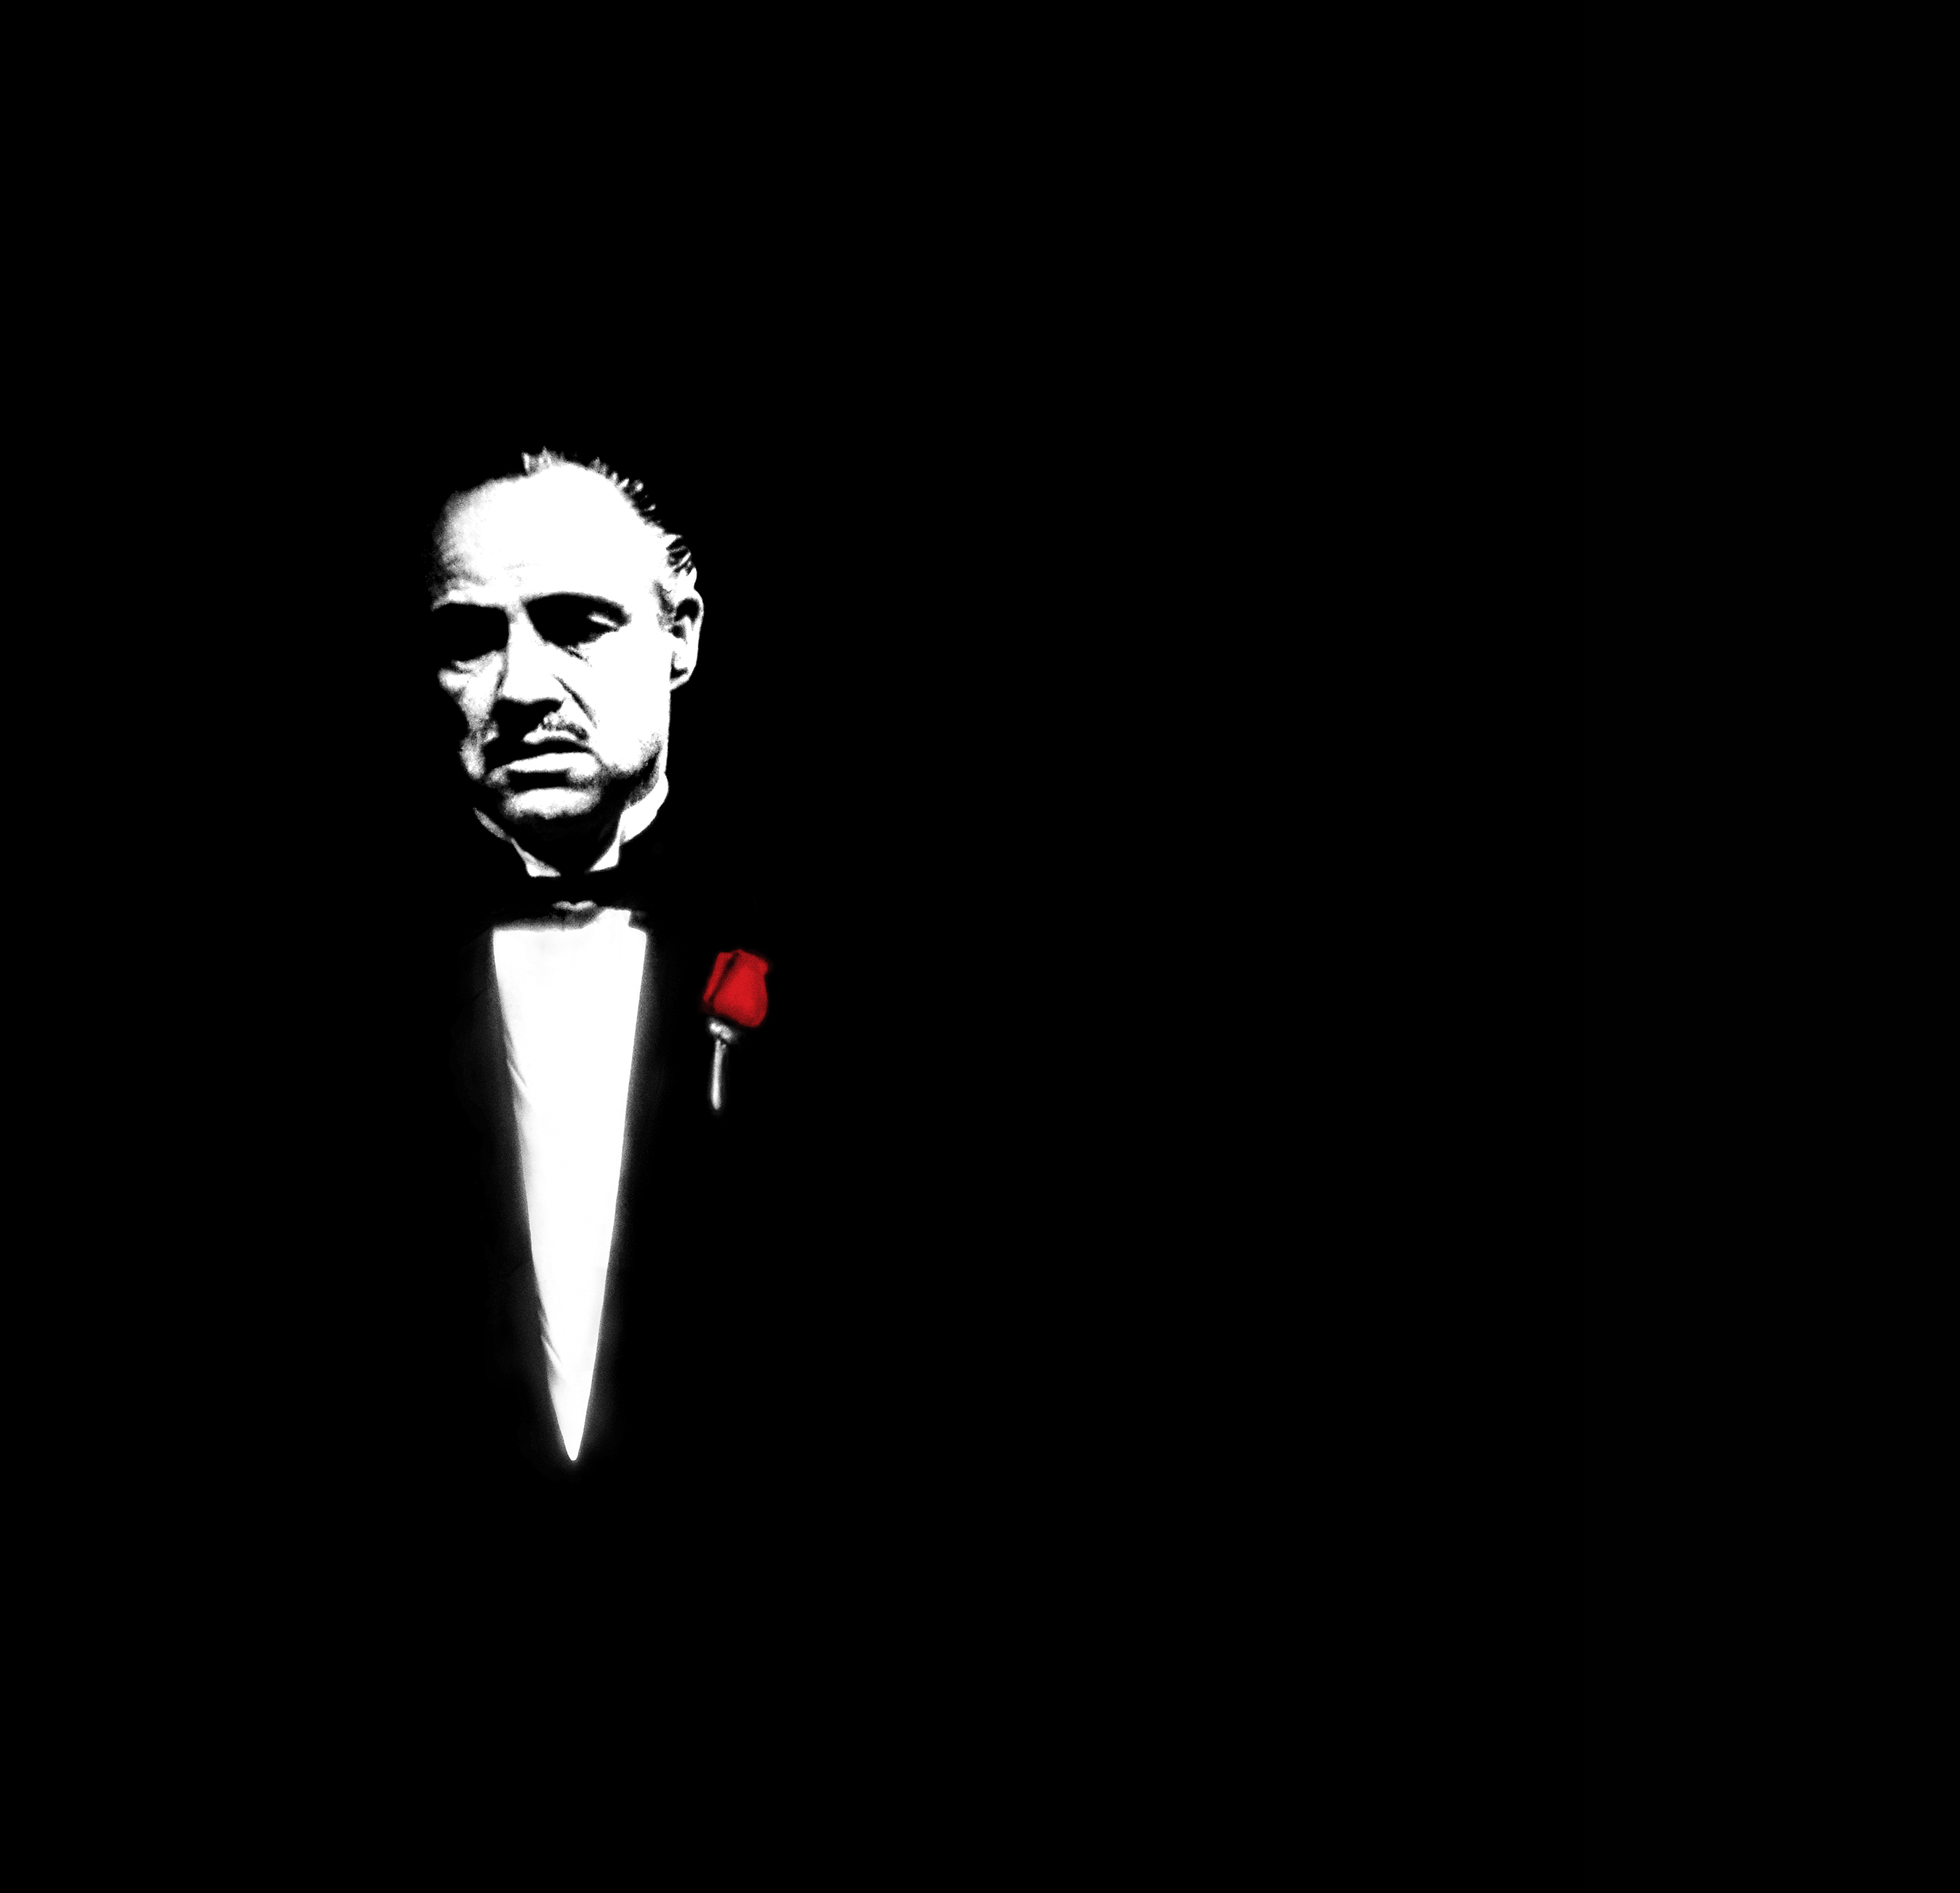 the godfather the game pc